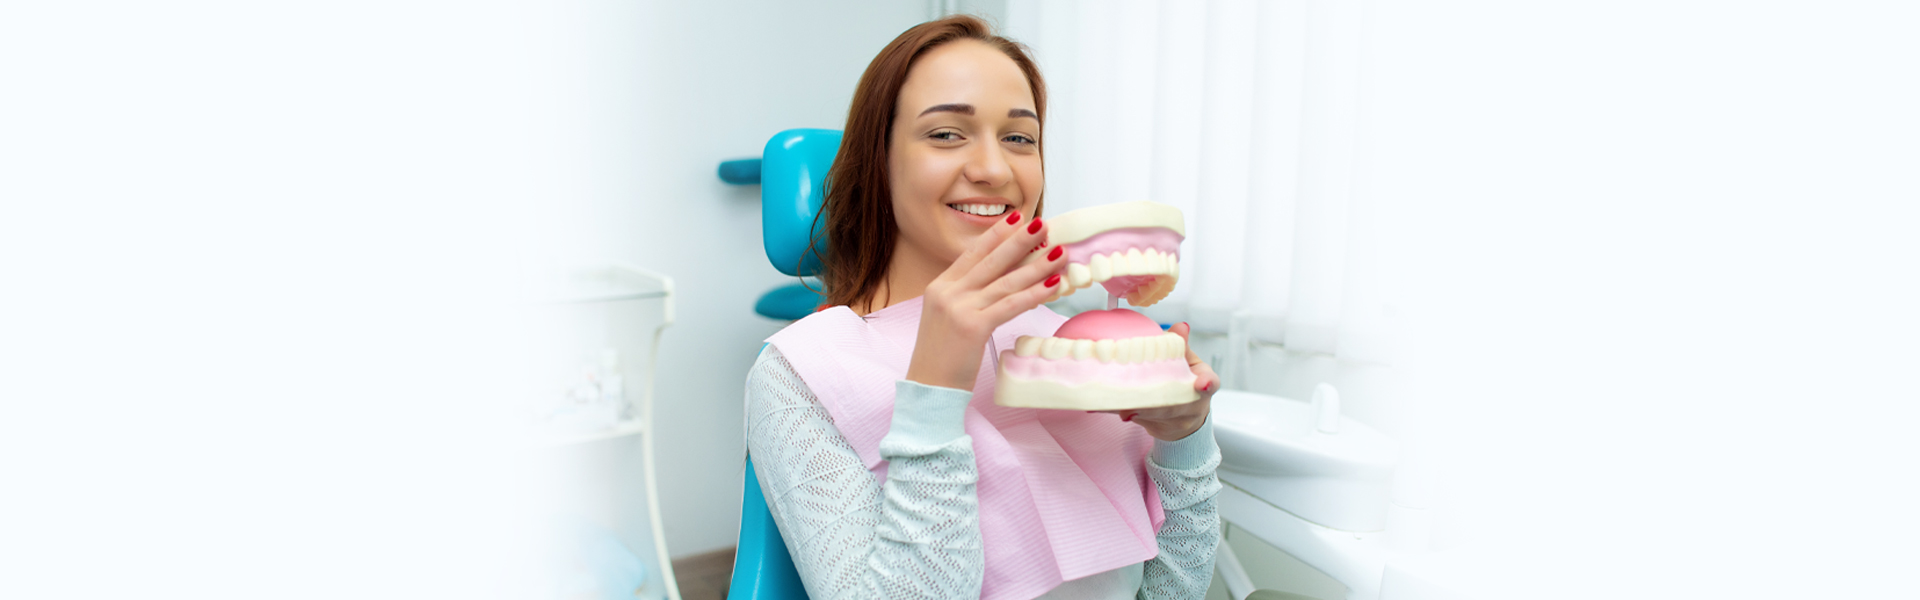 Top 7 Reasons to Have an Endodontics Treatment